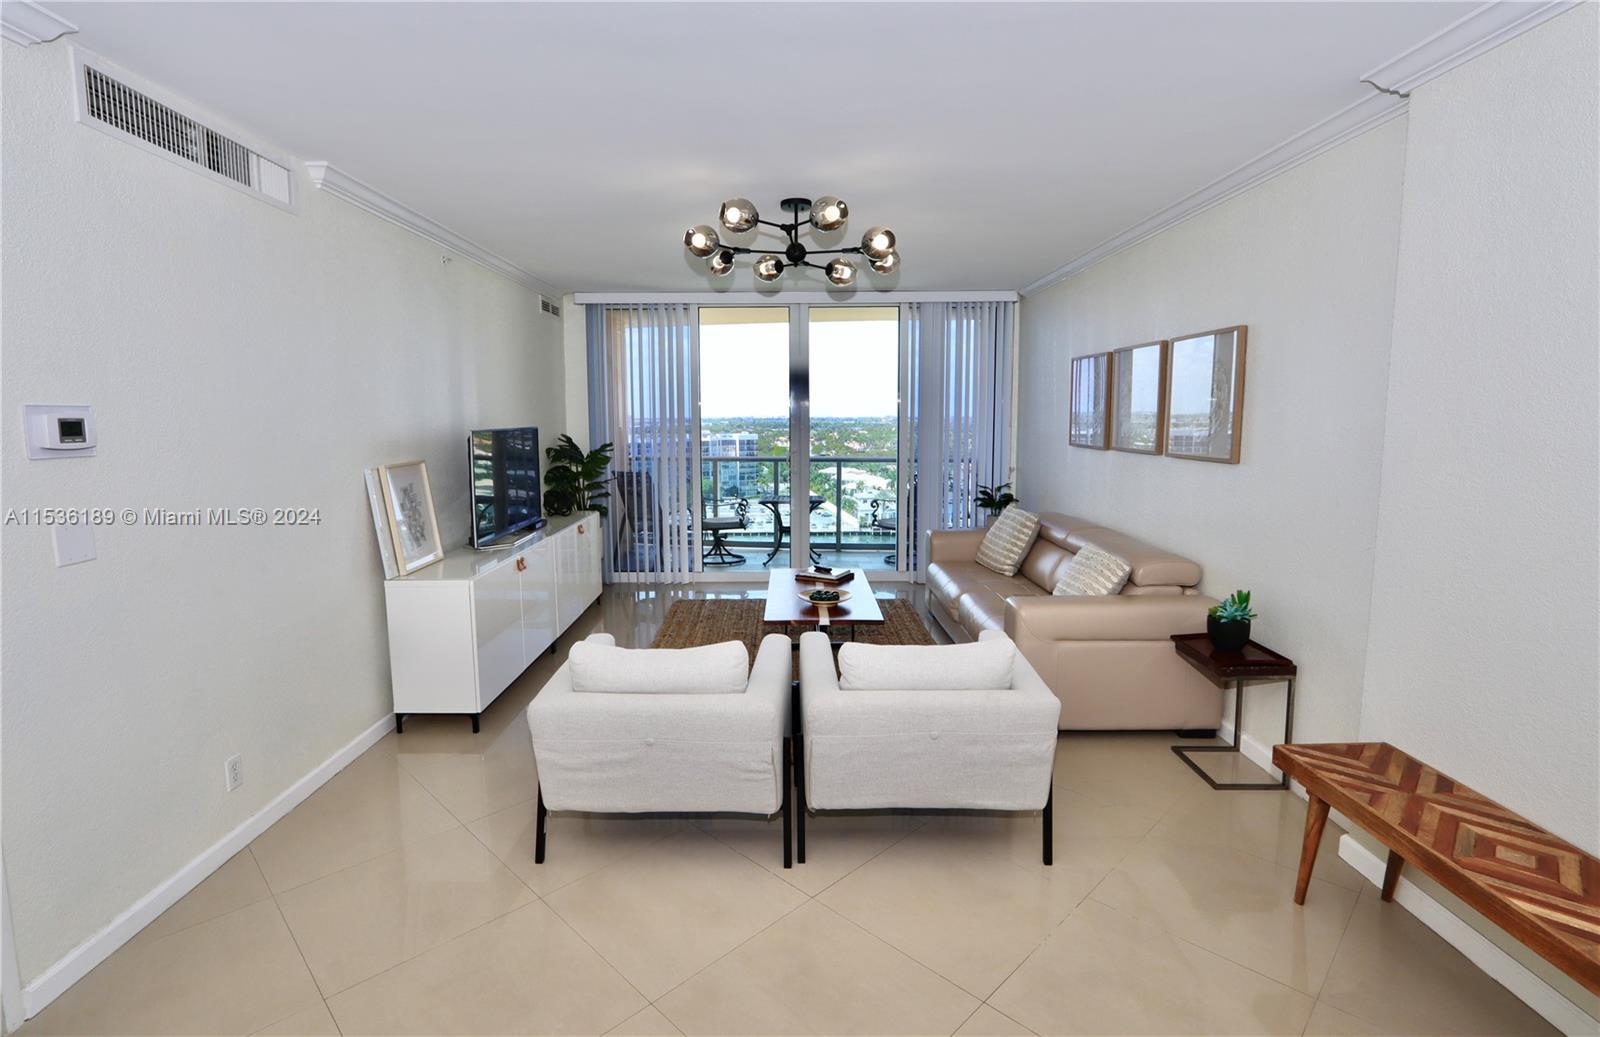 Photo of 2501 S Ocean Dr #1430 in Hollywood, FL